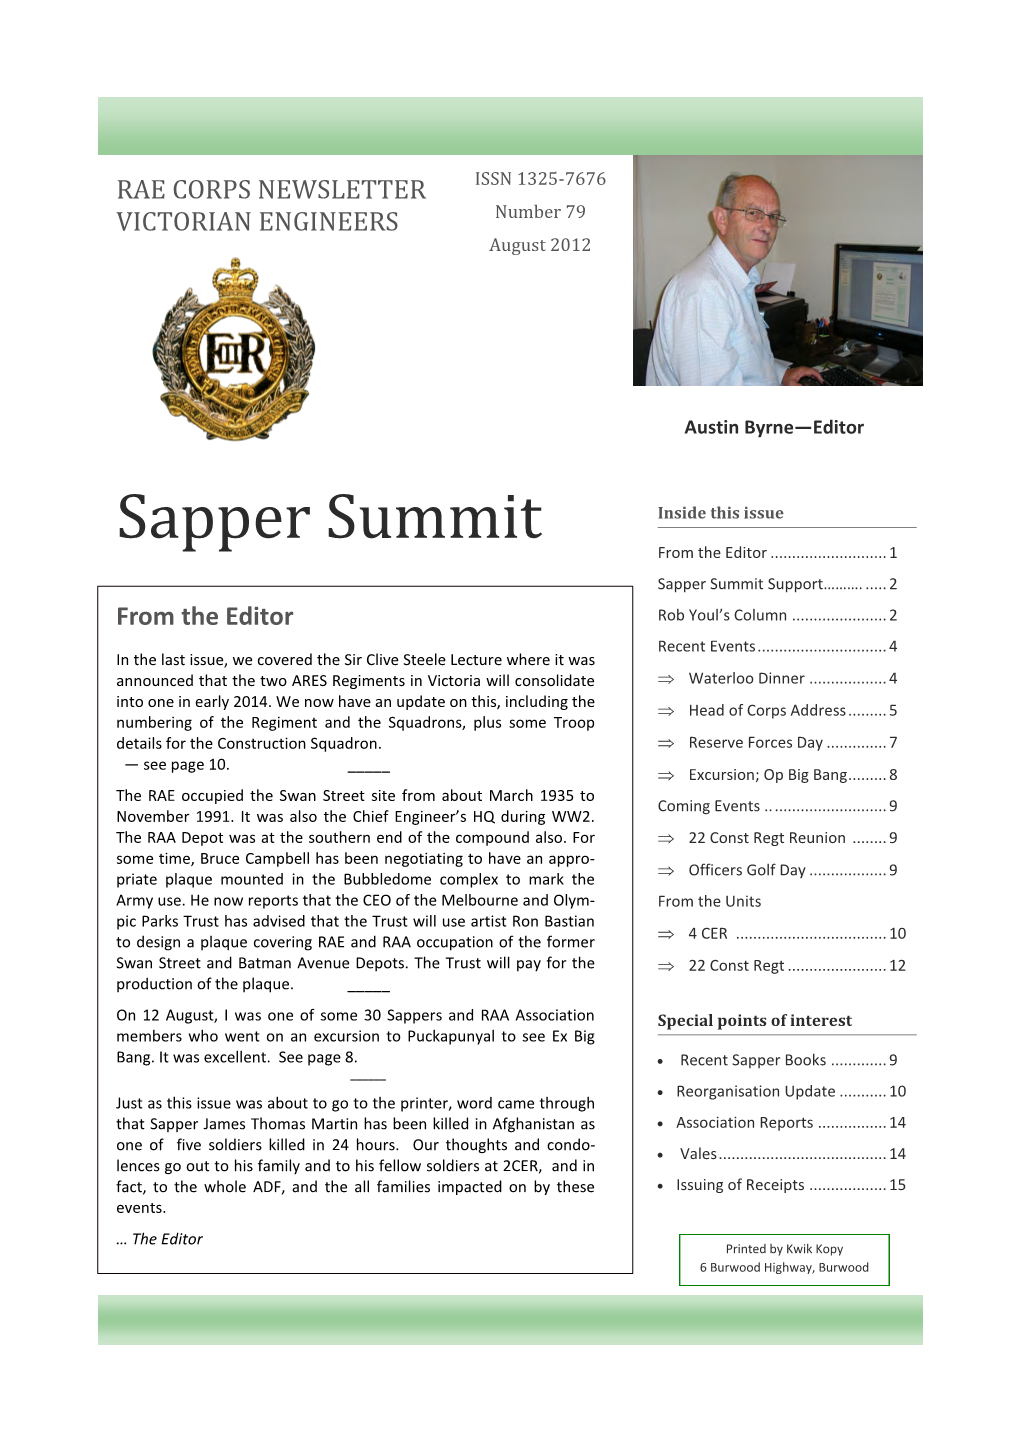 Sapper Summit Inside This Issue from the Editor